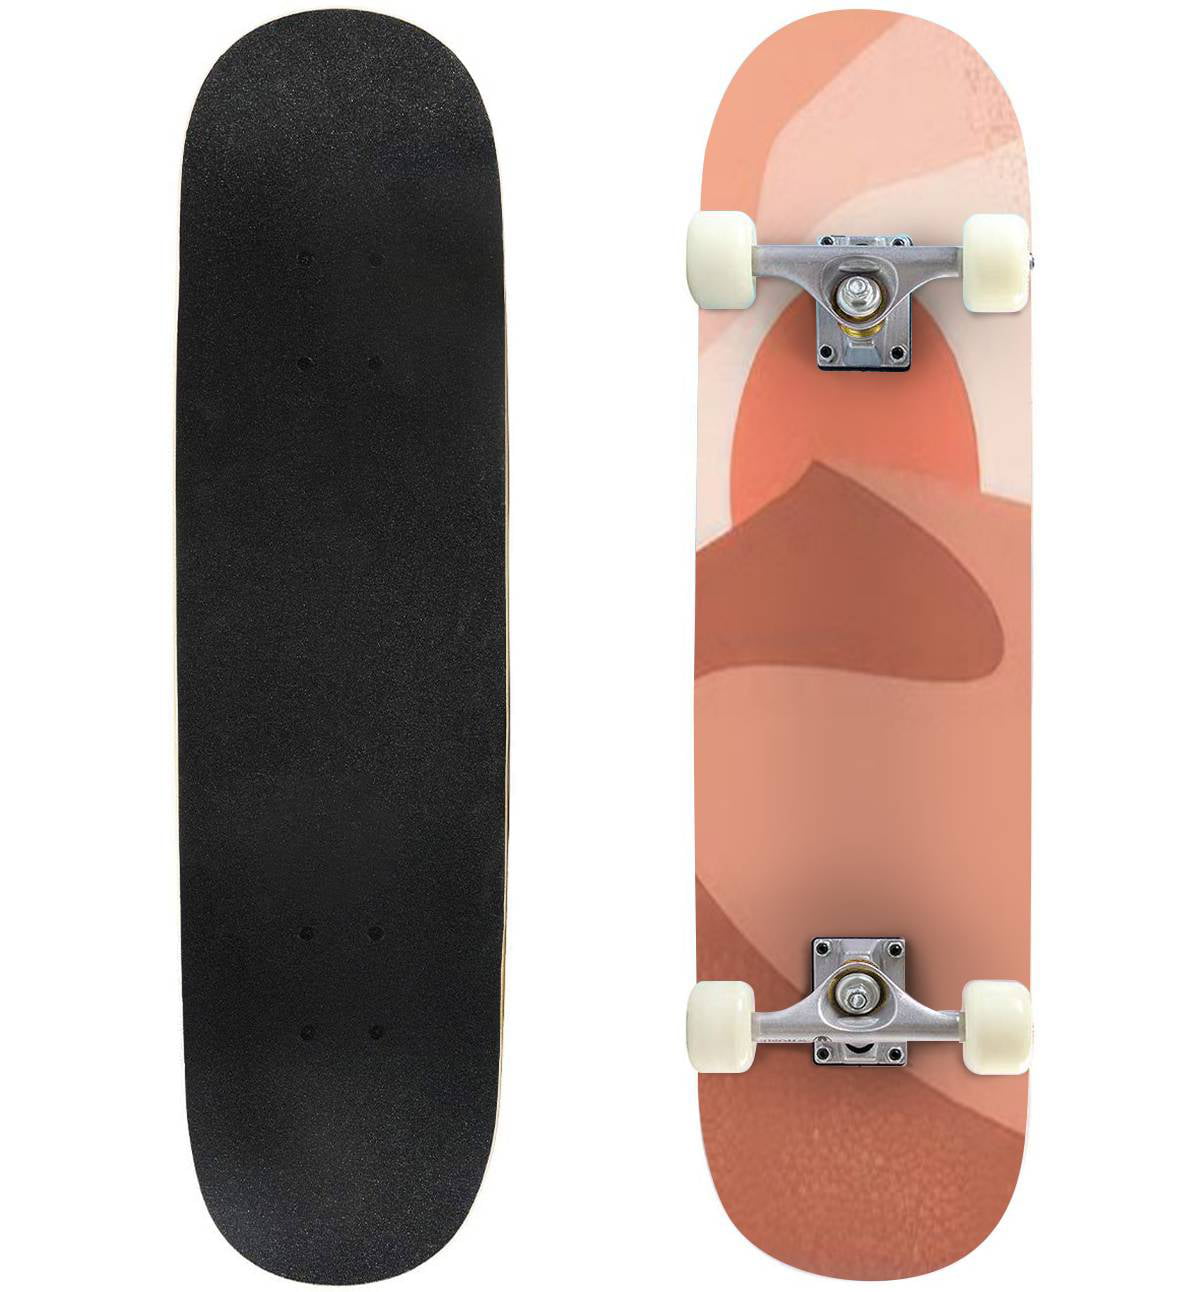 Fakultet Perforering nedbrydes Abstract contemporary aesthetic background with landscape desert sand  Outdoor Skateboard Longboards 31"x8" Pro Complete Skate Board Cruiser -  Walmart.com